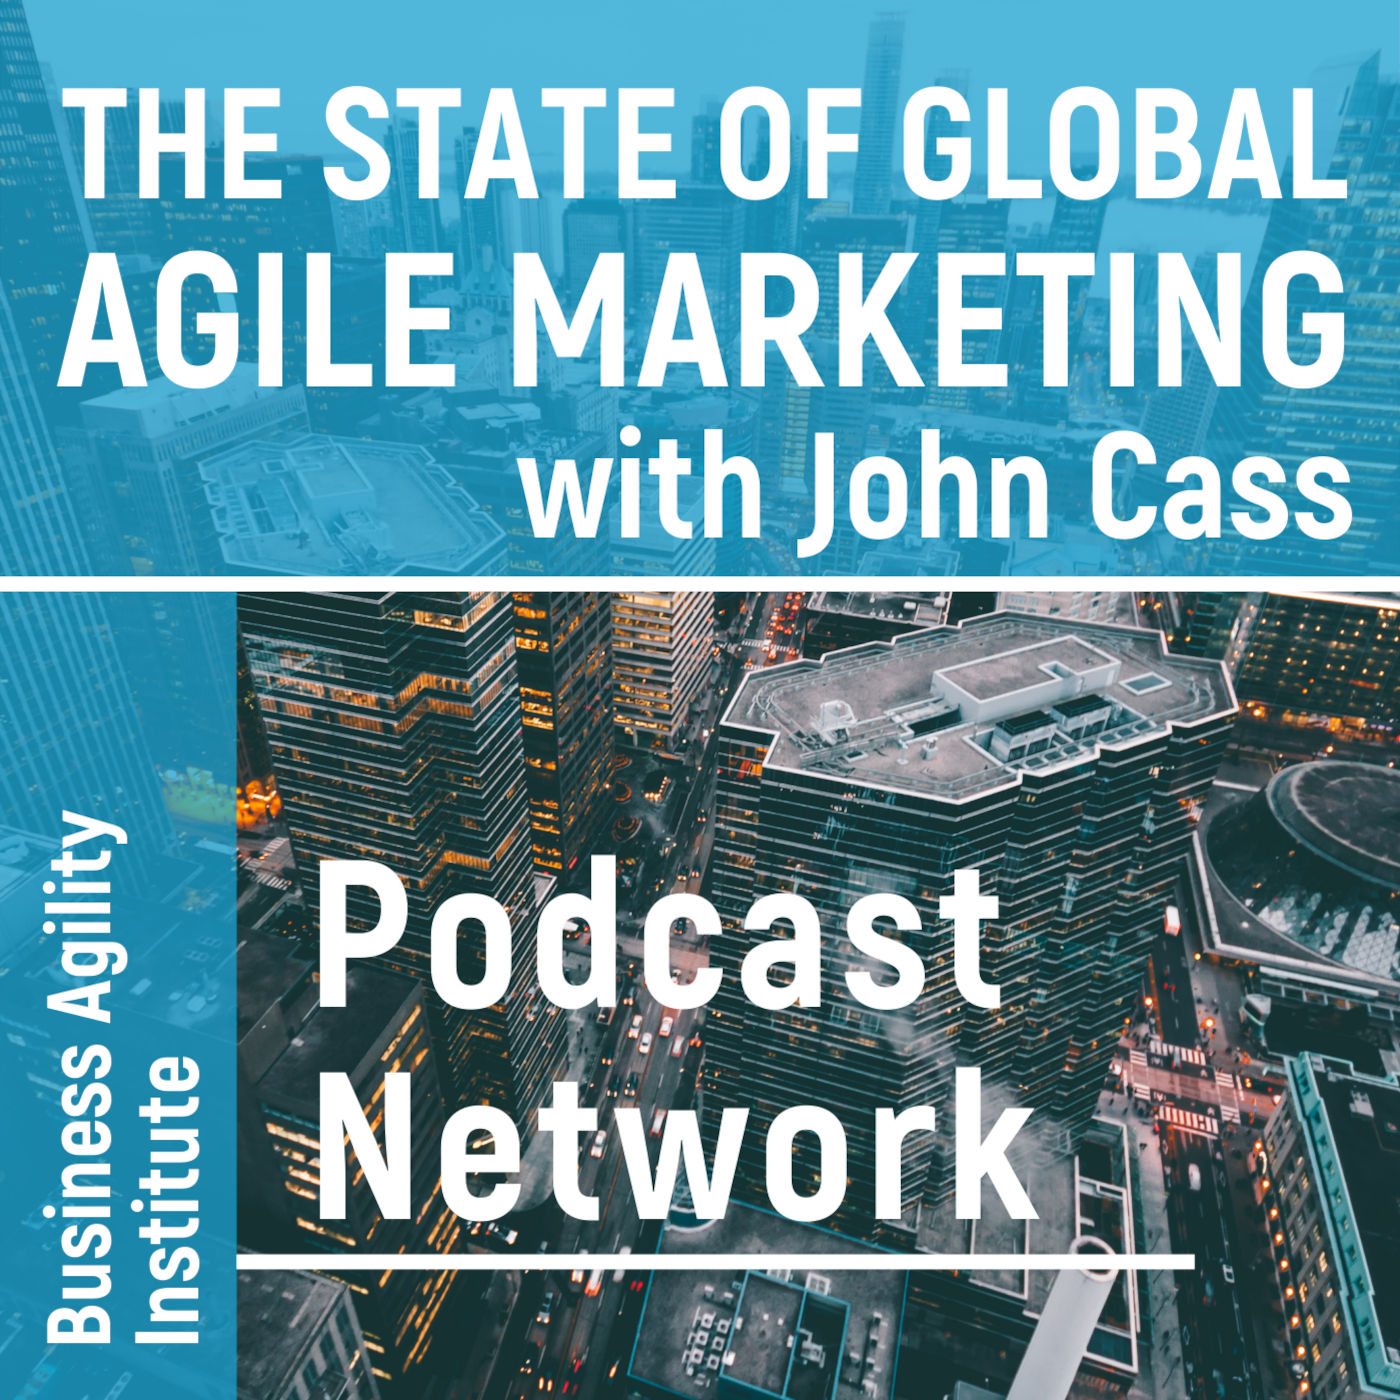 Artwork for podcast The State of Global Agile Marketing Podcast